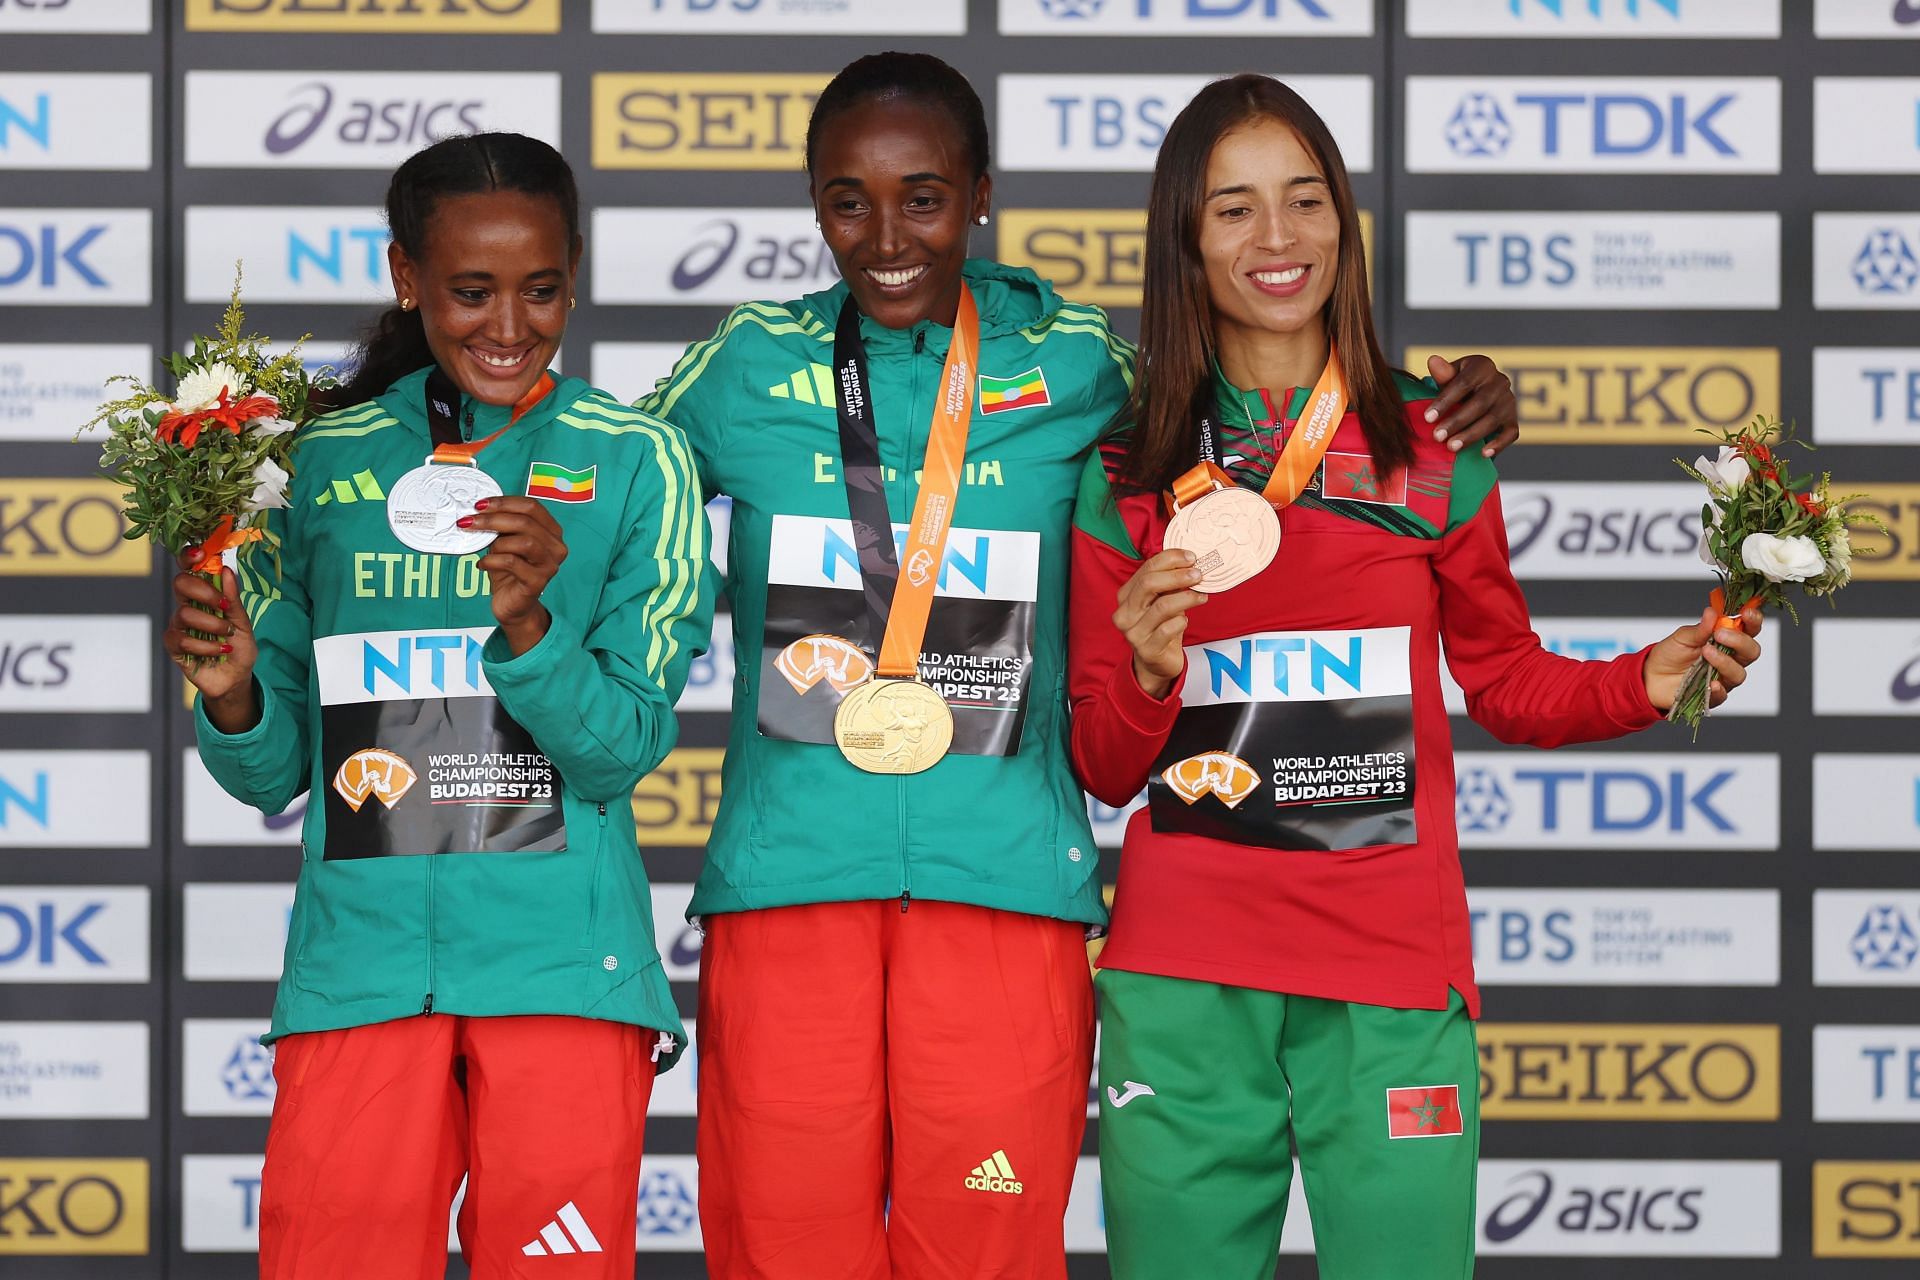 Gotytom Gebreslase, Amane Beriso Shankule and Fatima Ezzahra Gardadi during the medal ceremony for the Women&#039;s Marathon at the World Athletics Championships Budapest 2023. (Photo by Christian Petersen/Getty Images for World Athletics)